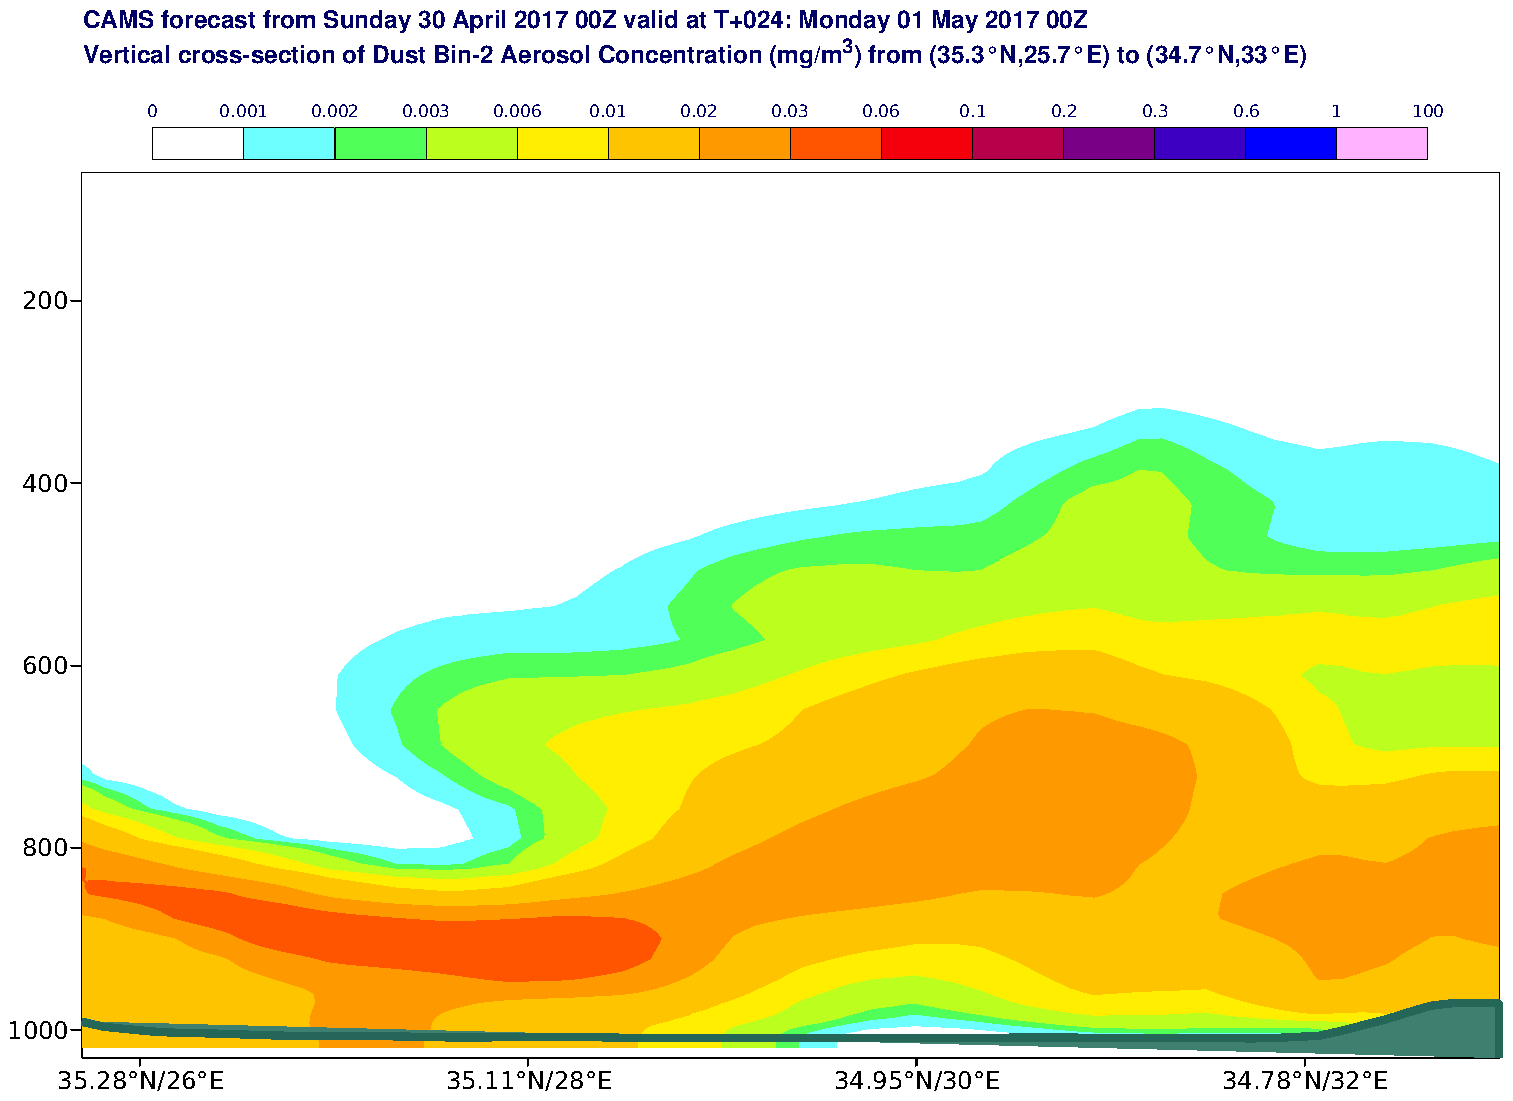 Vertical cross-section of Dust Bin-2 Aerosol Concentration (mg/m3) valid at T24 - 2017-05-01 00:00